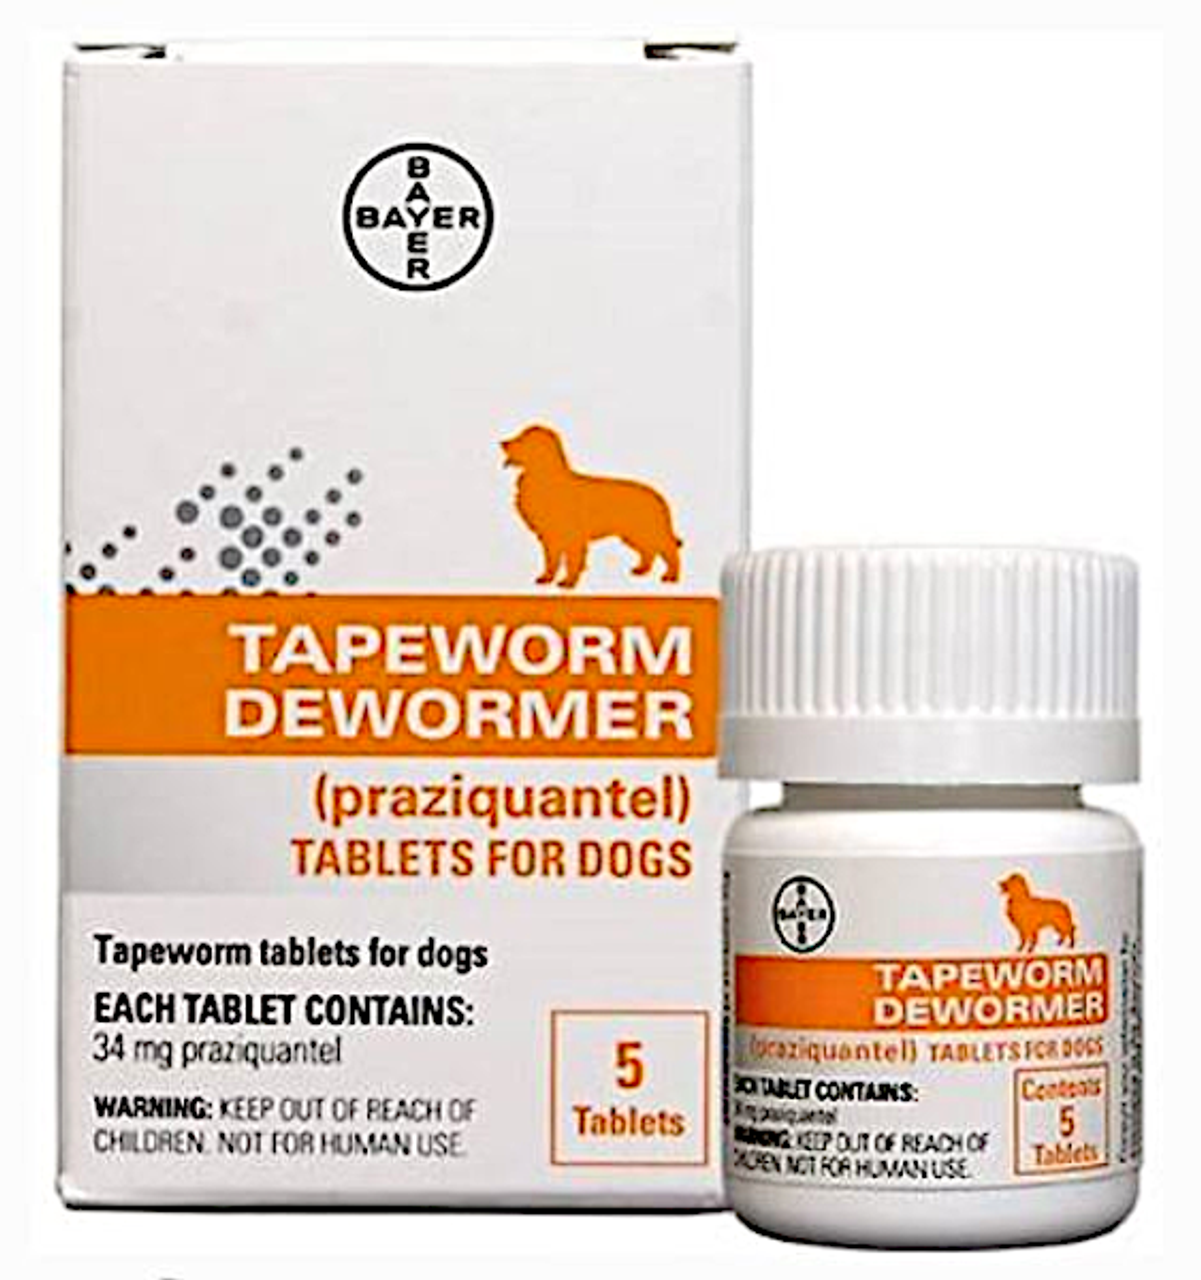 5 count tablets of bayer tapeworm dewormer at OKIE DOG SUPPLY